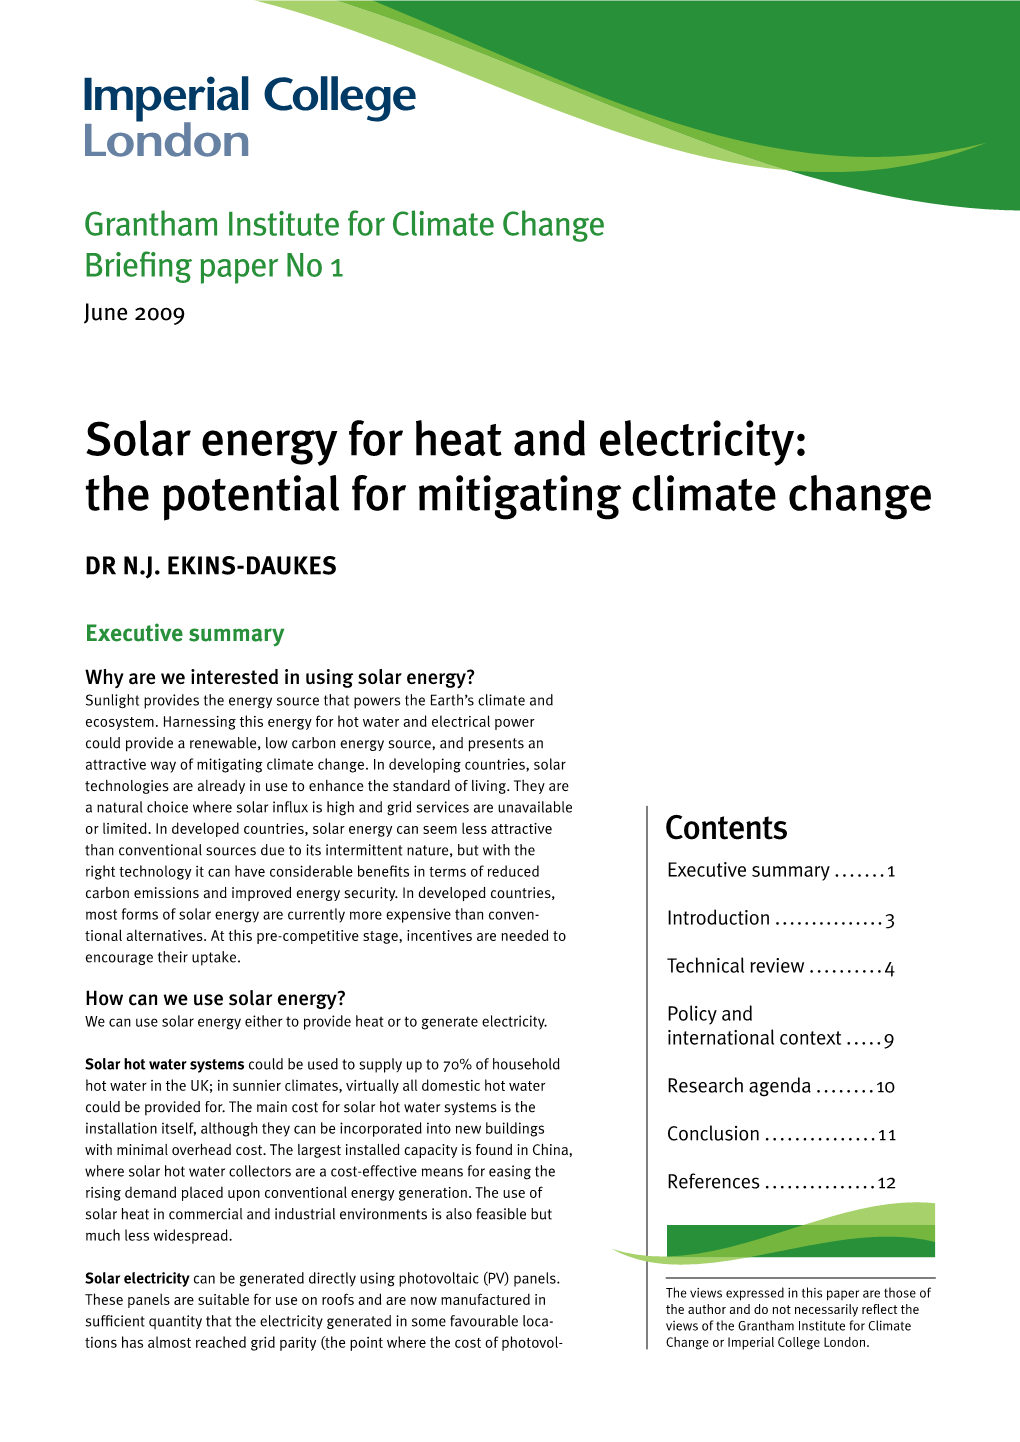 Solar Energy for Heat and Electricity: the Potential for Mitigating Climate Change